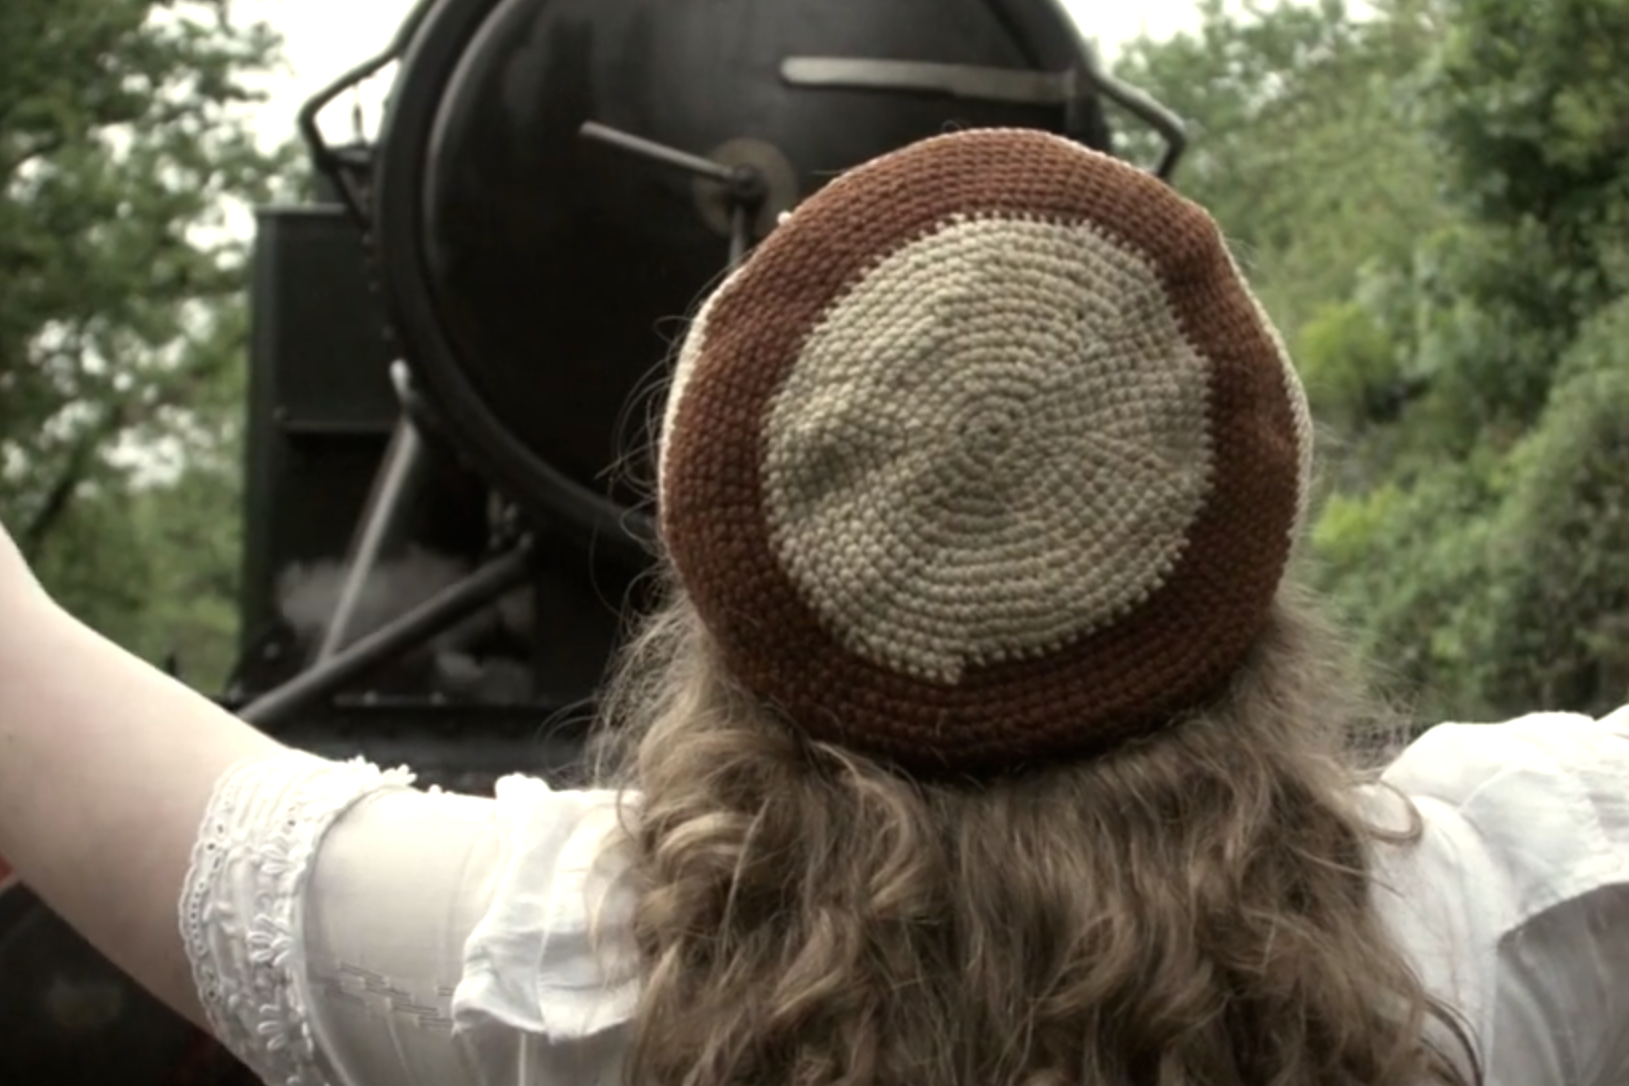 A brave girl stands in front of a steam train